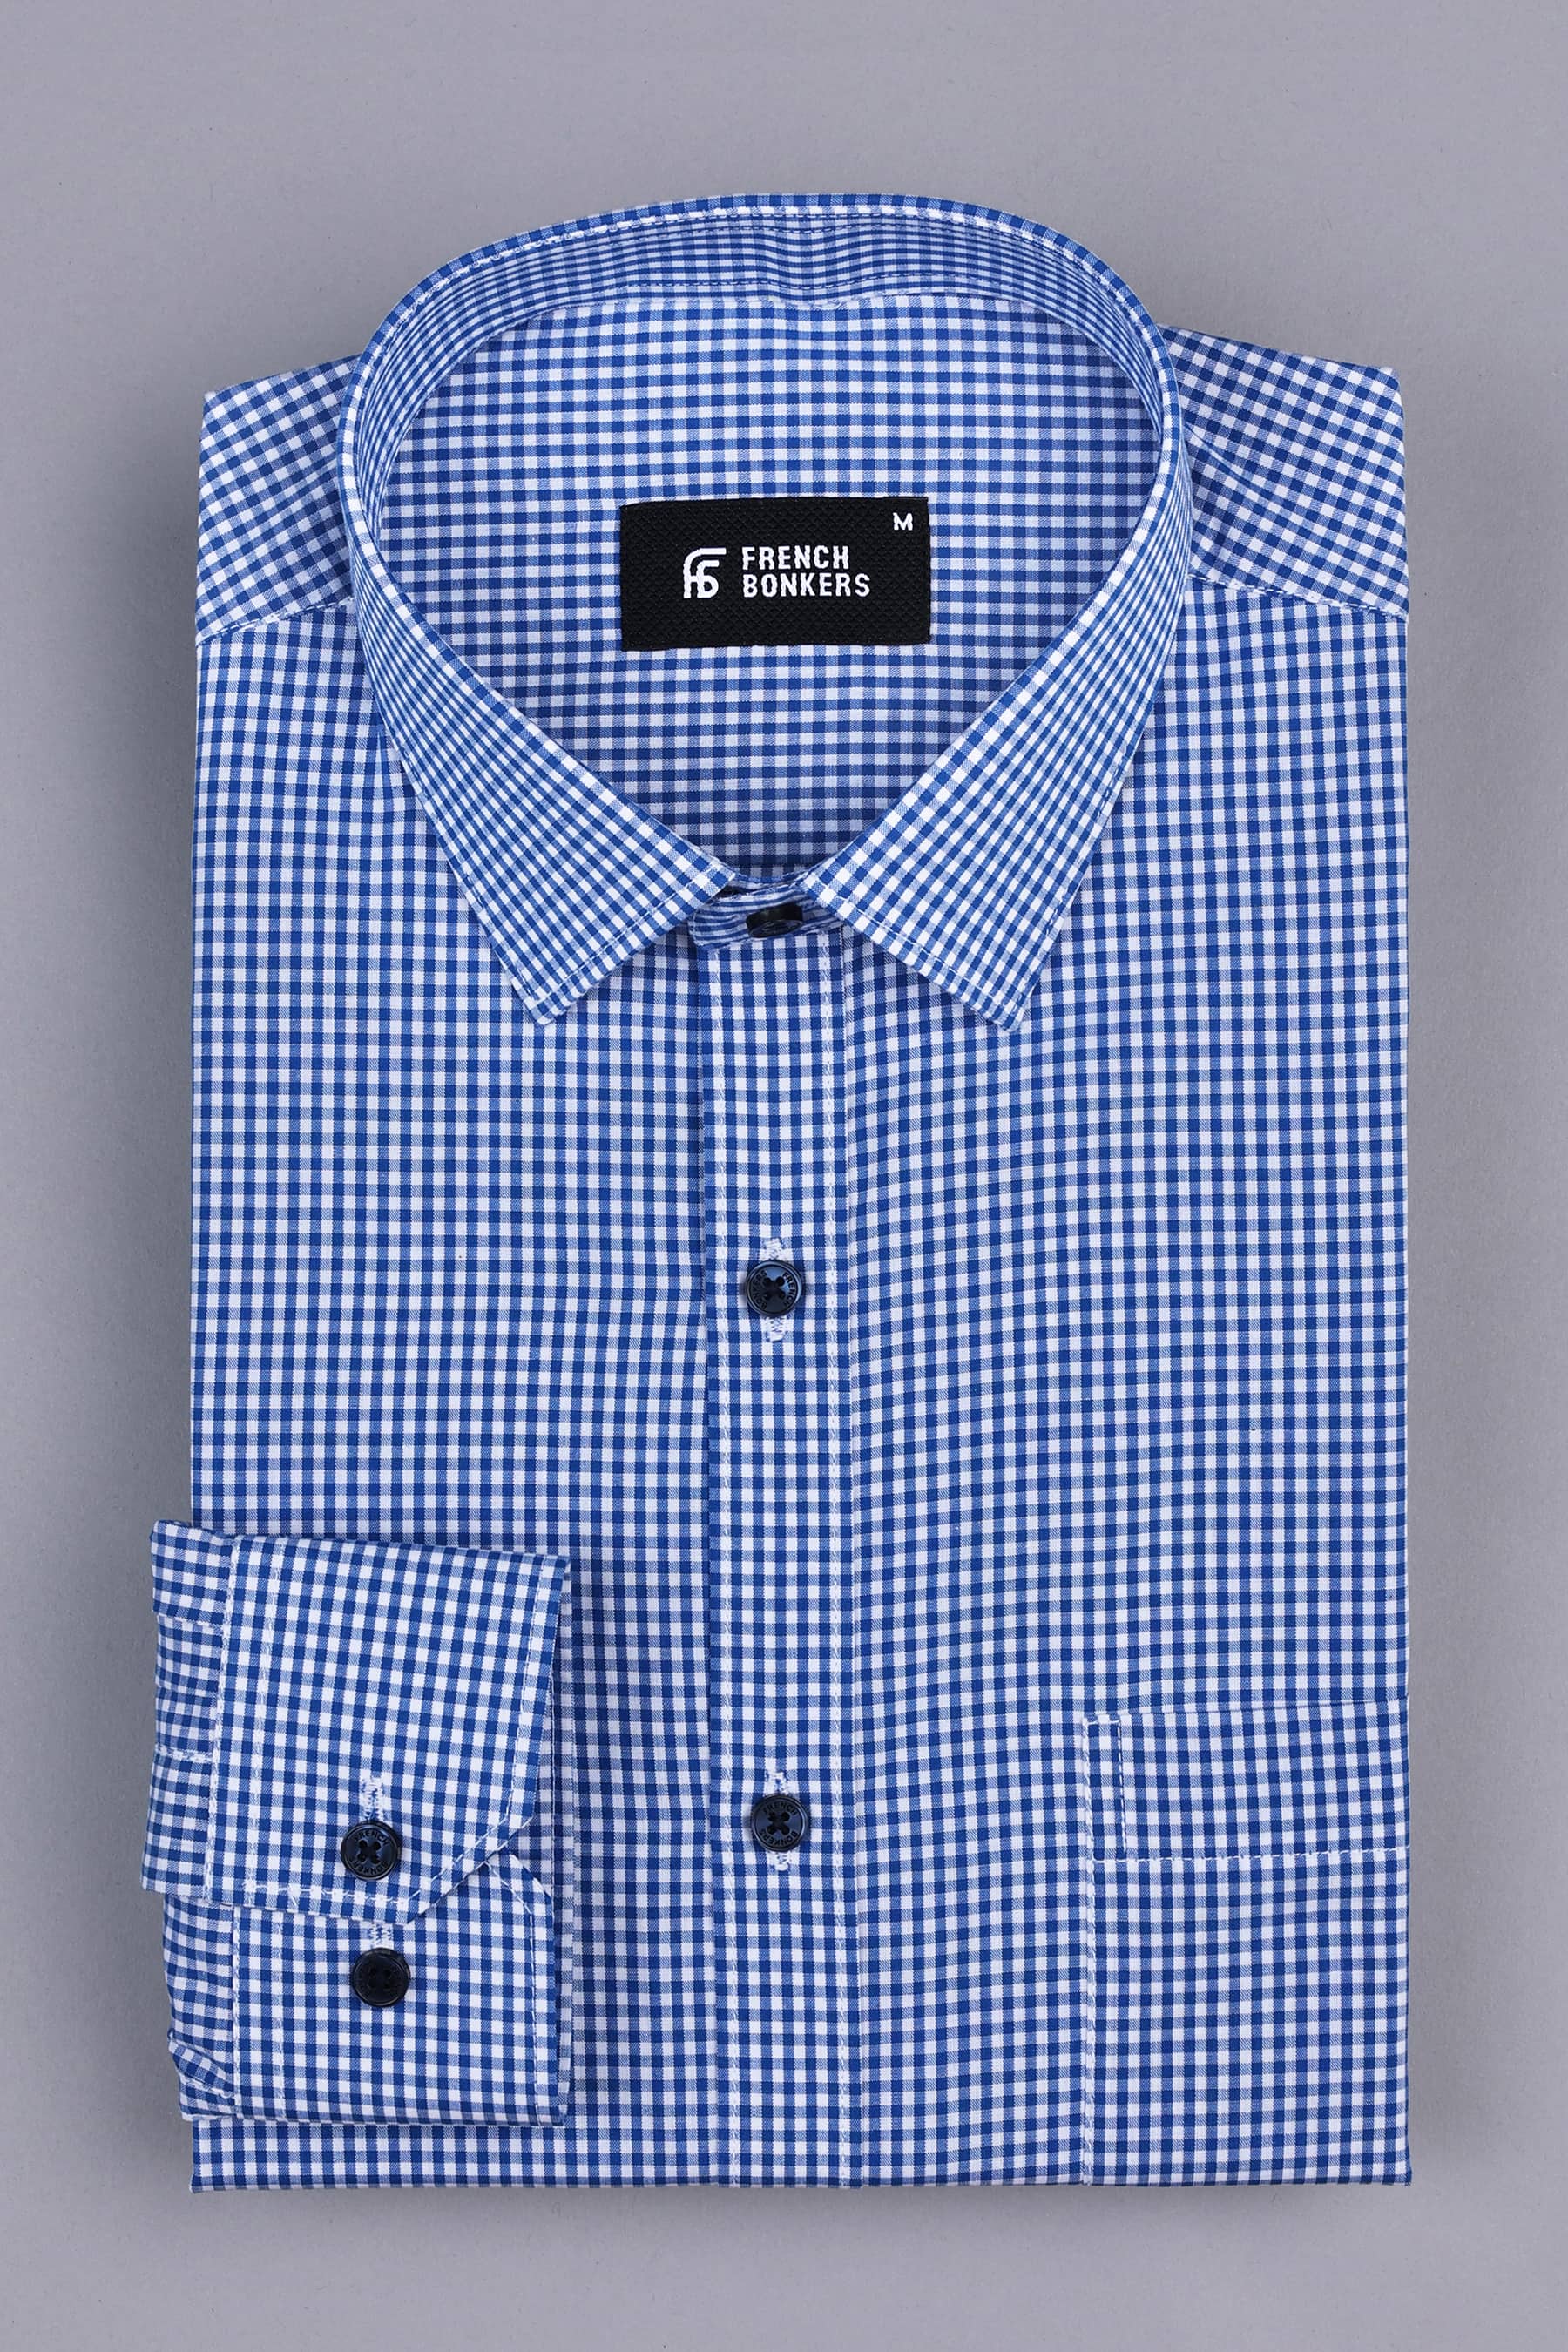 Cobalt blue with white pin check  cotton shirt